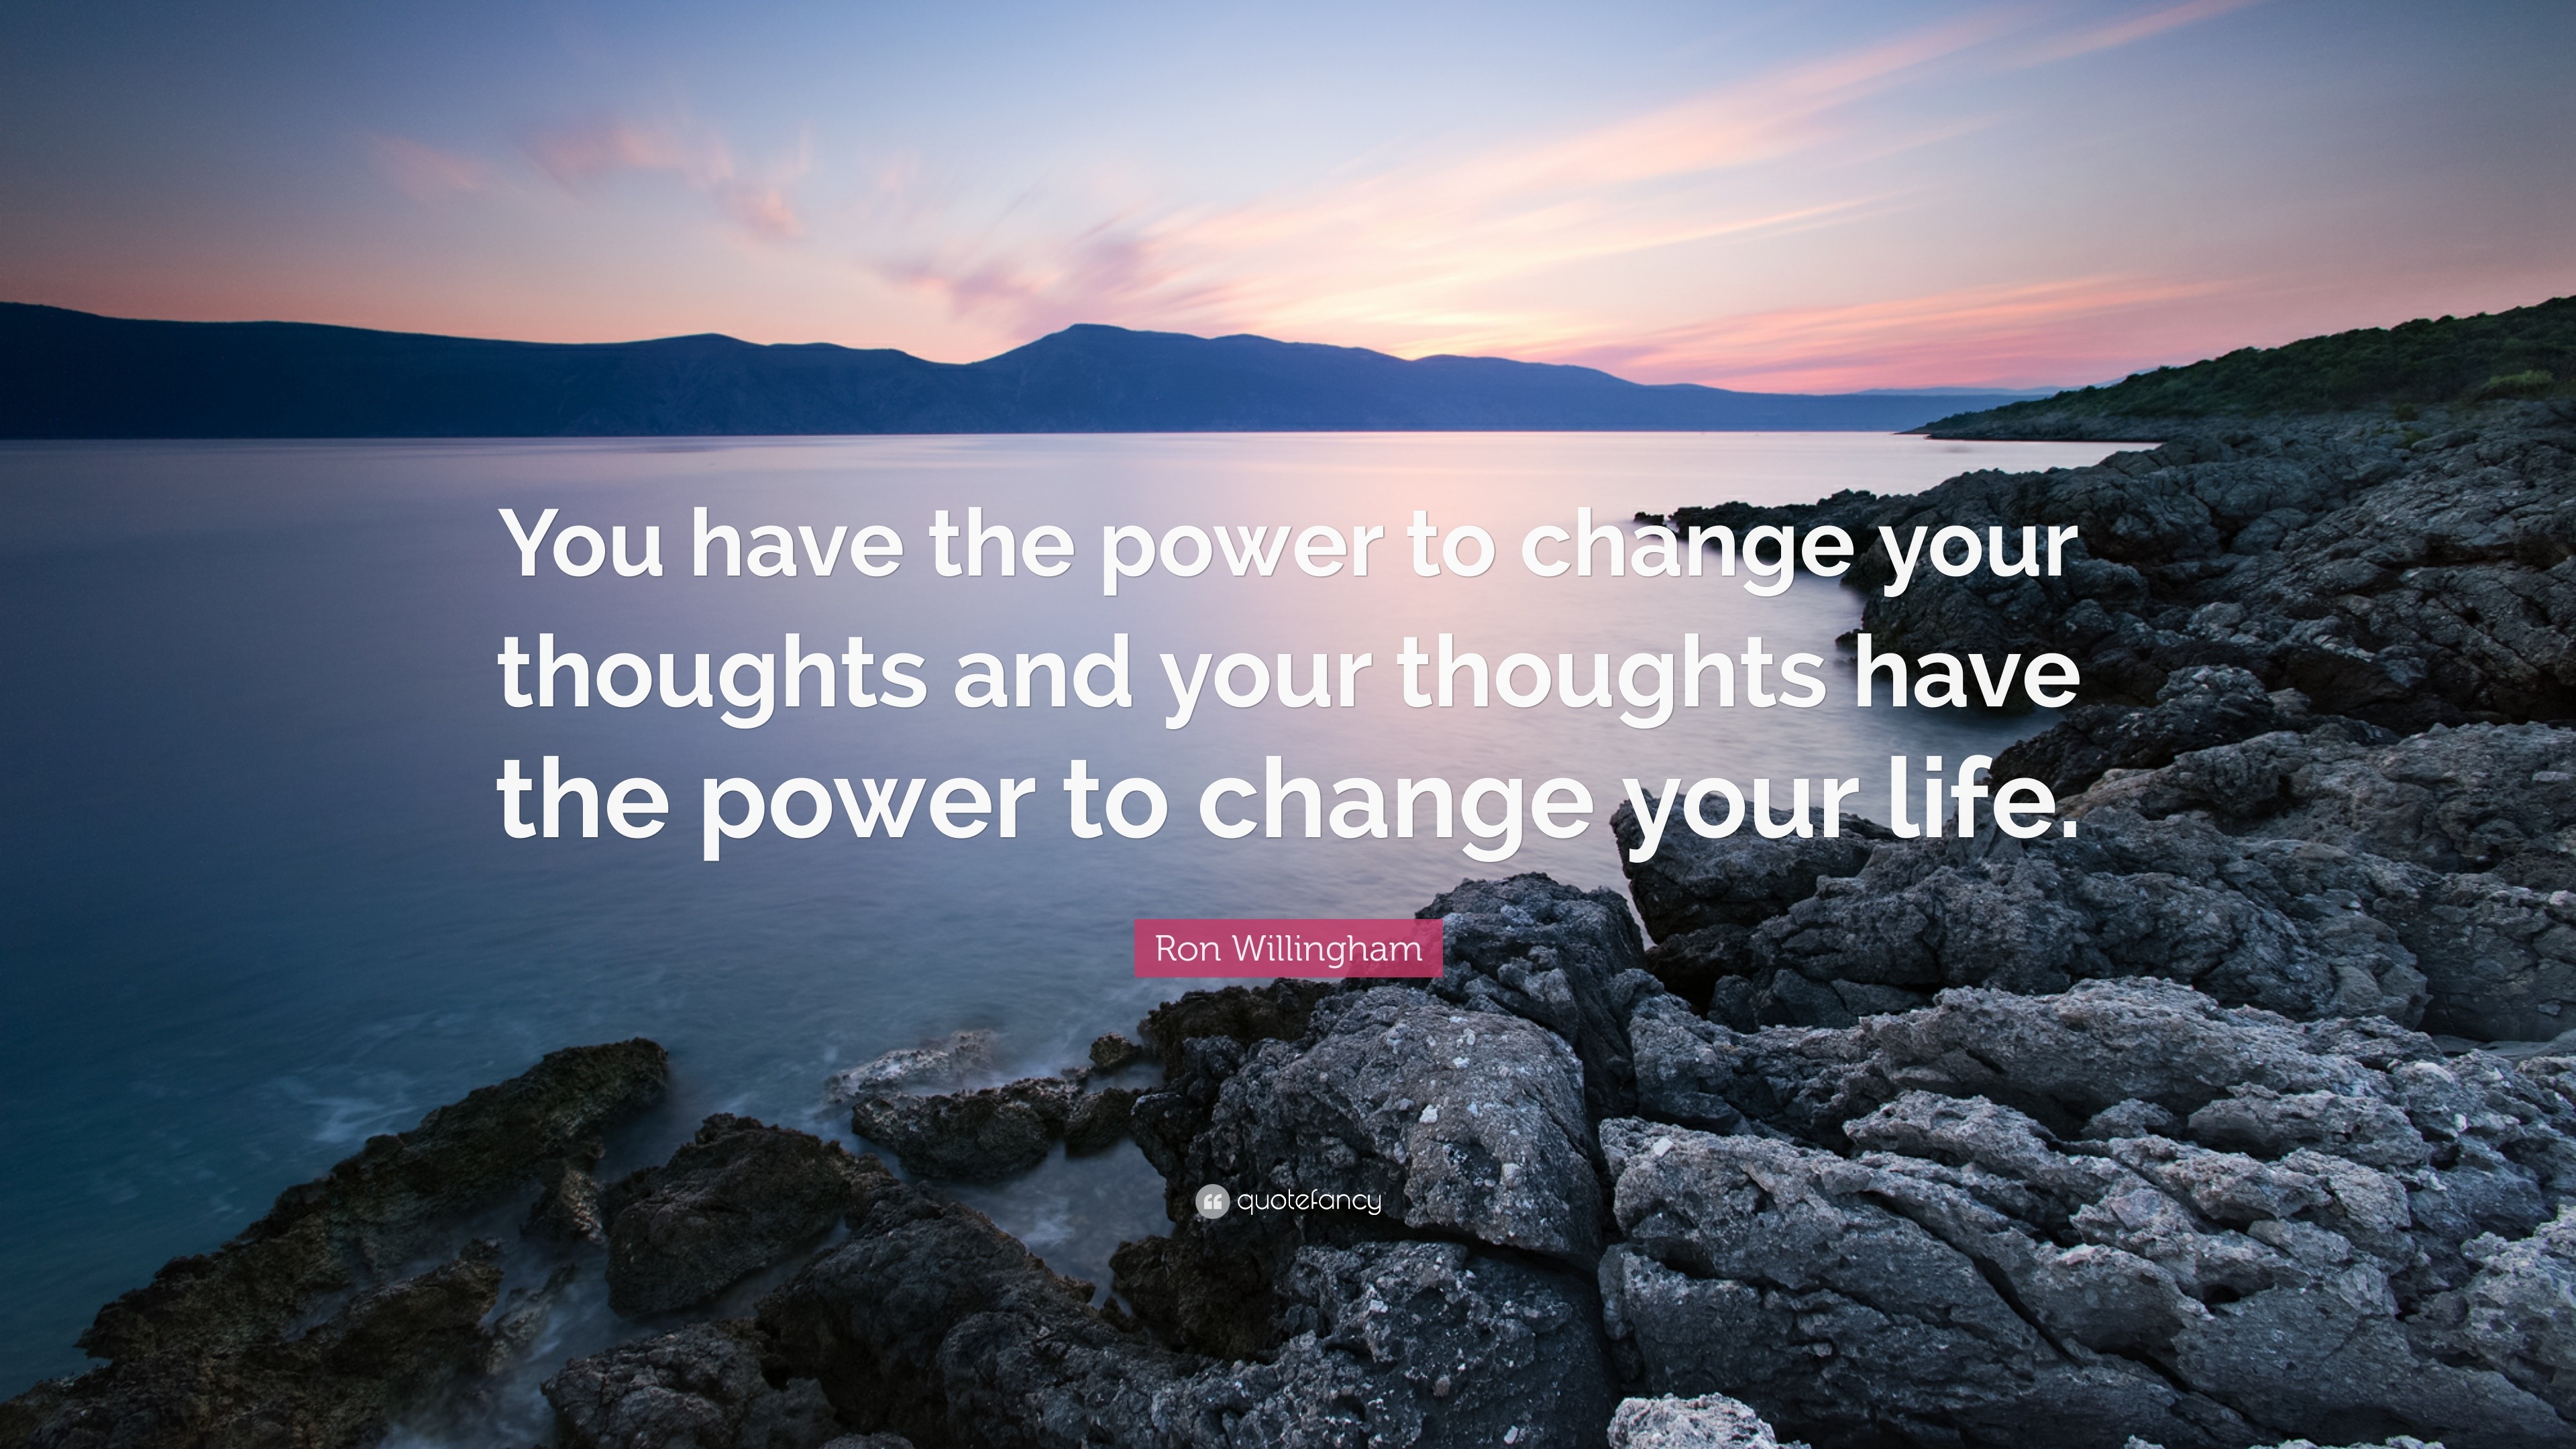 Ron Willingham Quote “You have the power to change your thoughts and your thoughts